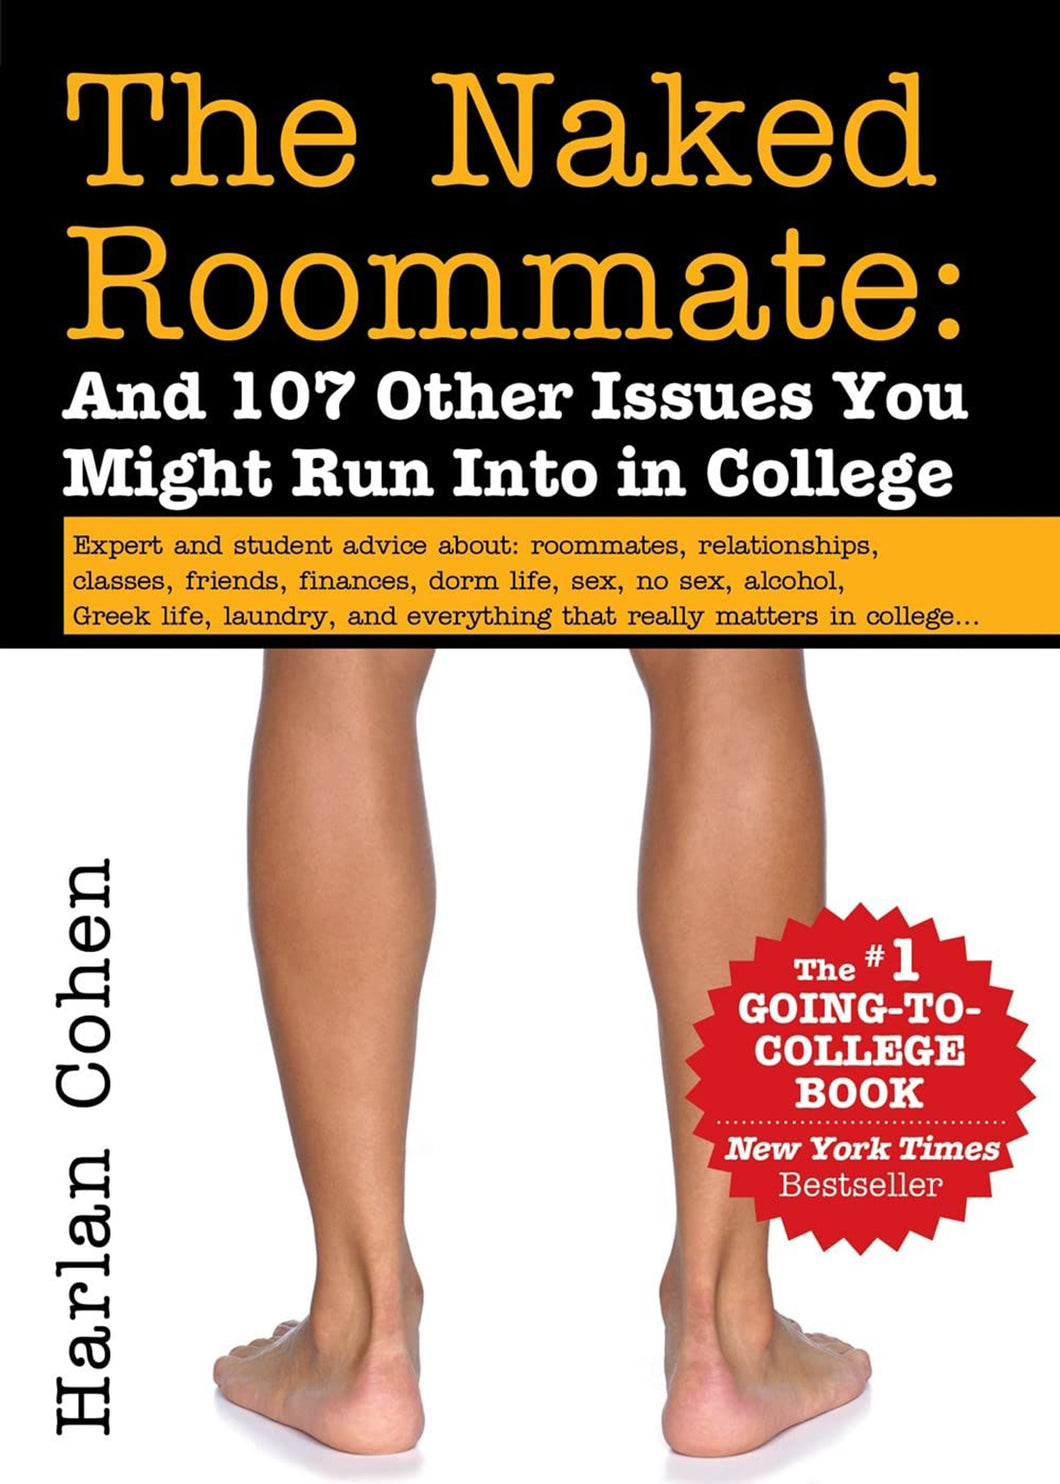 The Naked Roommate: And 107 Other Issues You Might Run Into in College by Harlan Cohen / Paperback - NEW BOOK